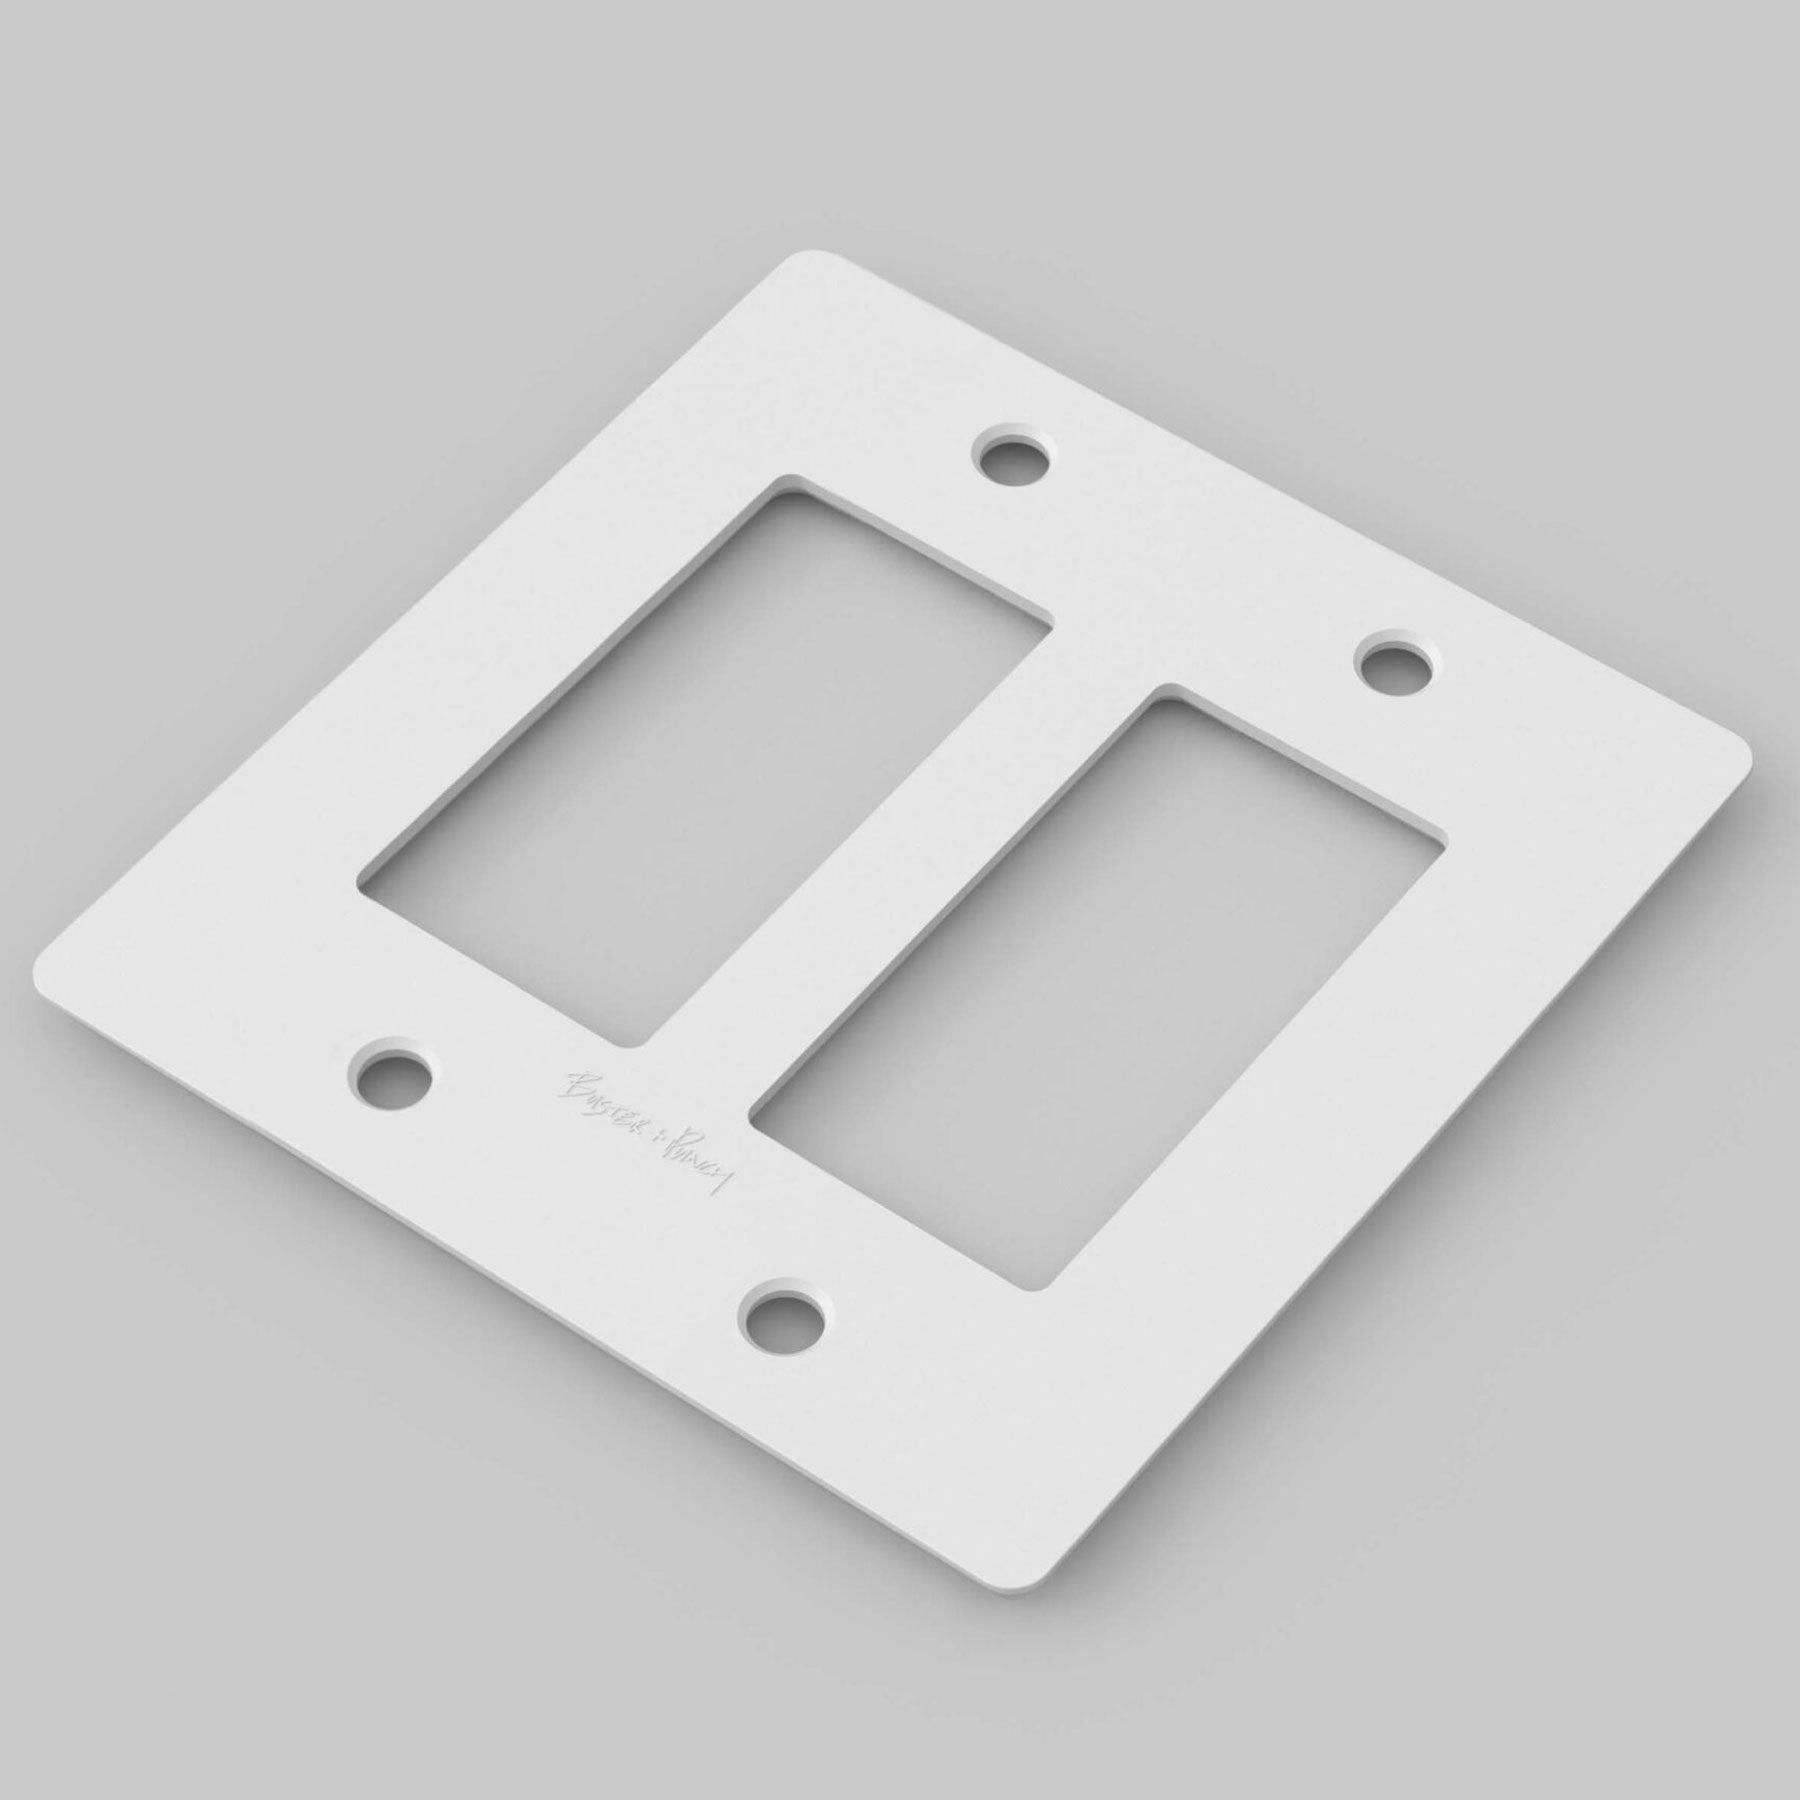 Buster + Punch Wall Plates l Polycarbonate